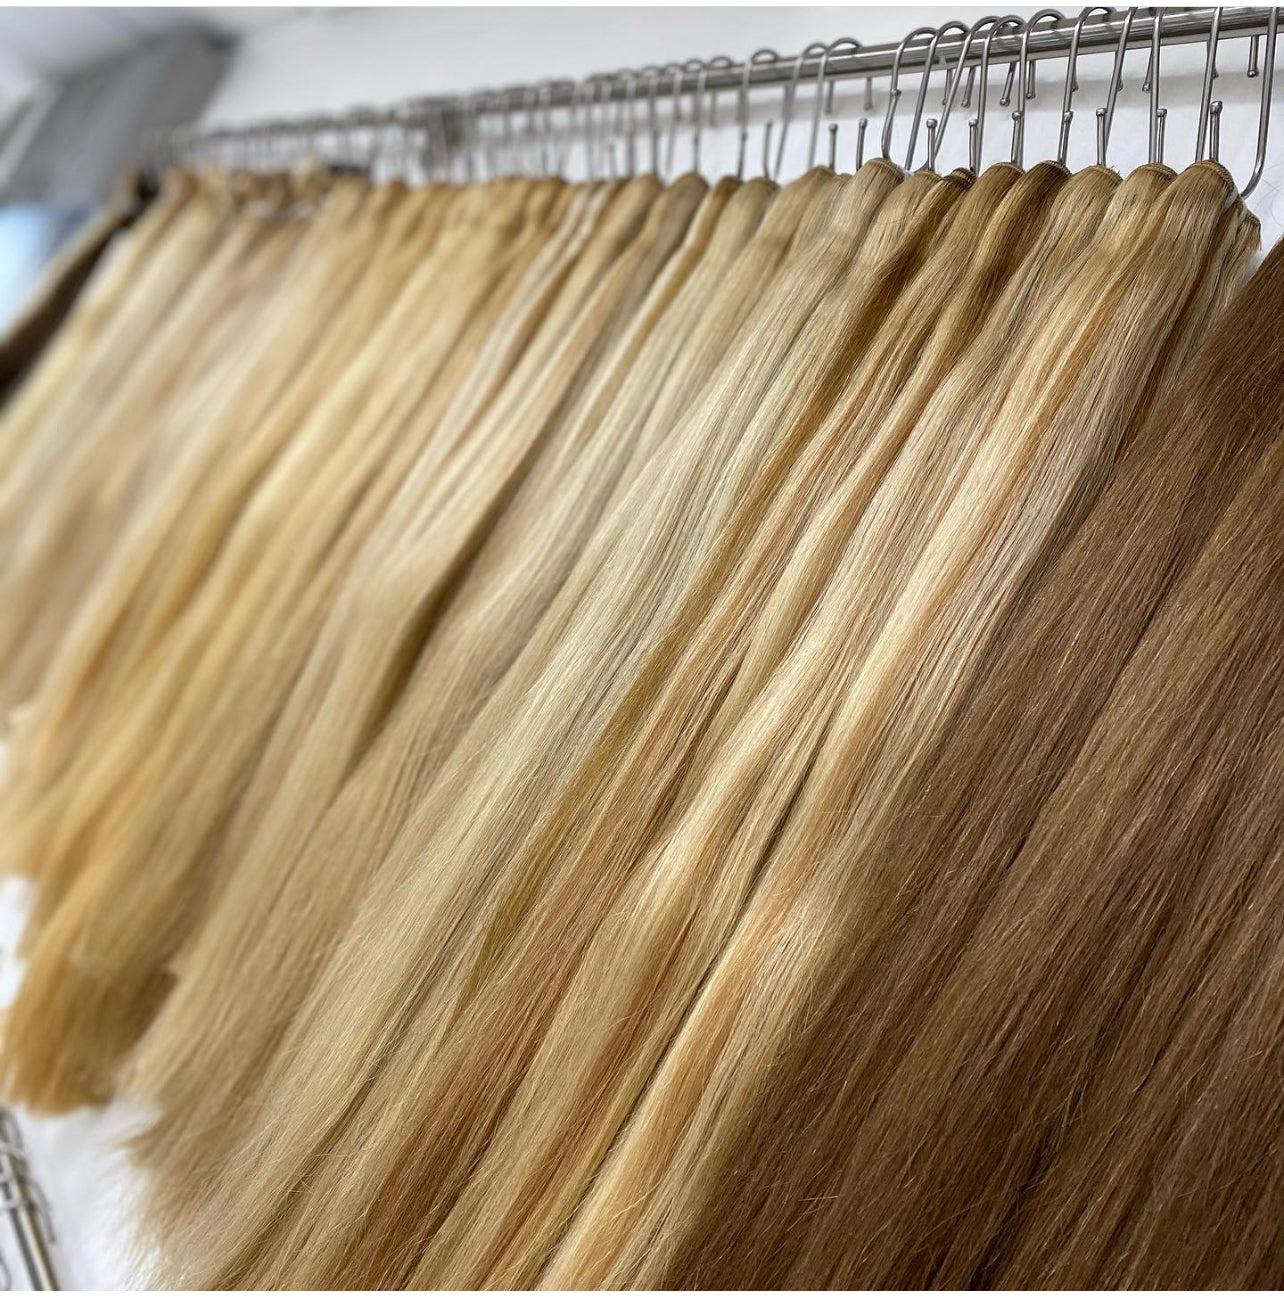 Types of Hair Extensions